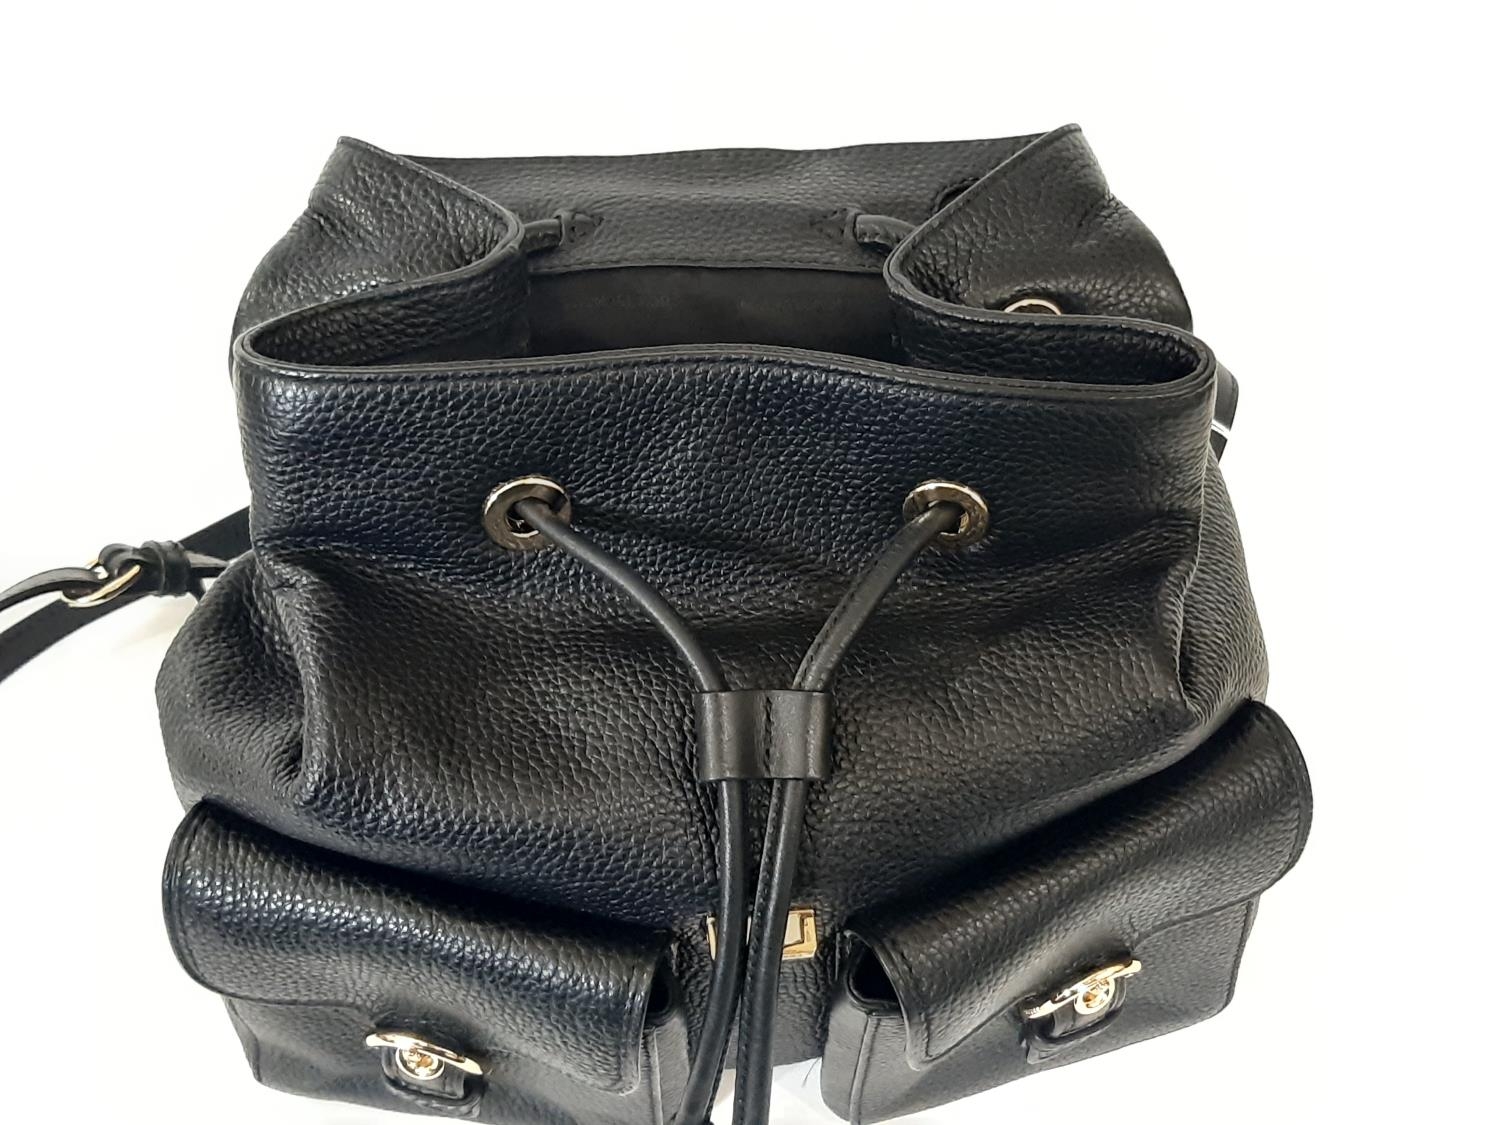 Ladies backpack style bag by Michael Kors in textured black leather with top flap, 2 front pockets - Image 3 of 3